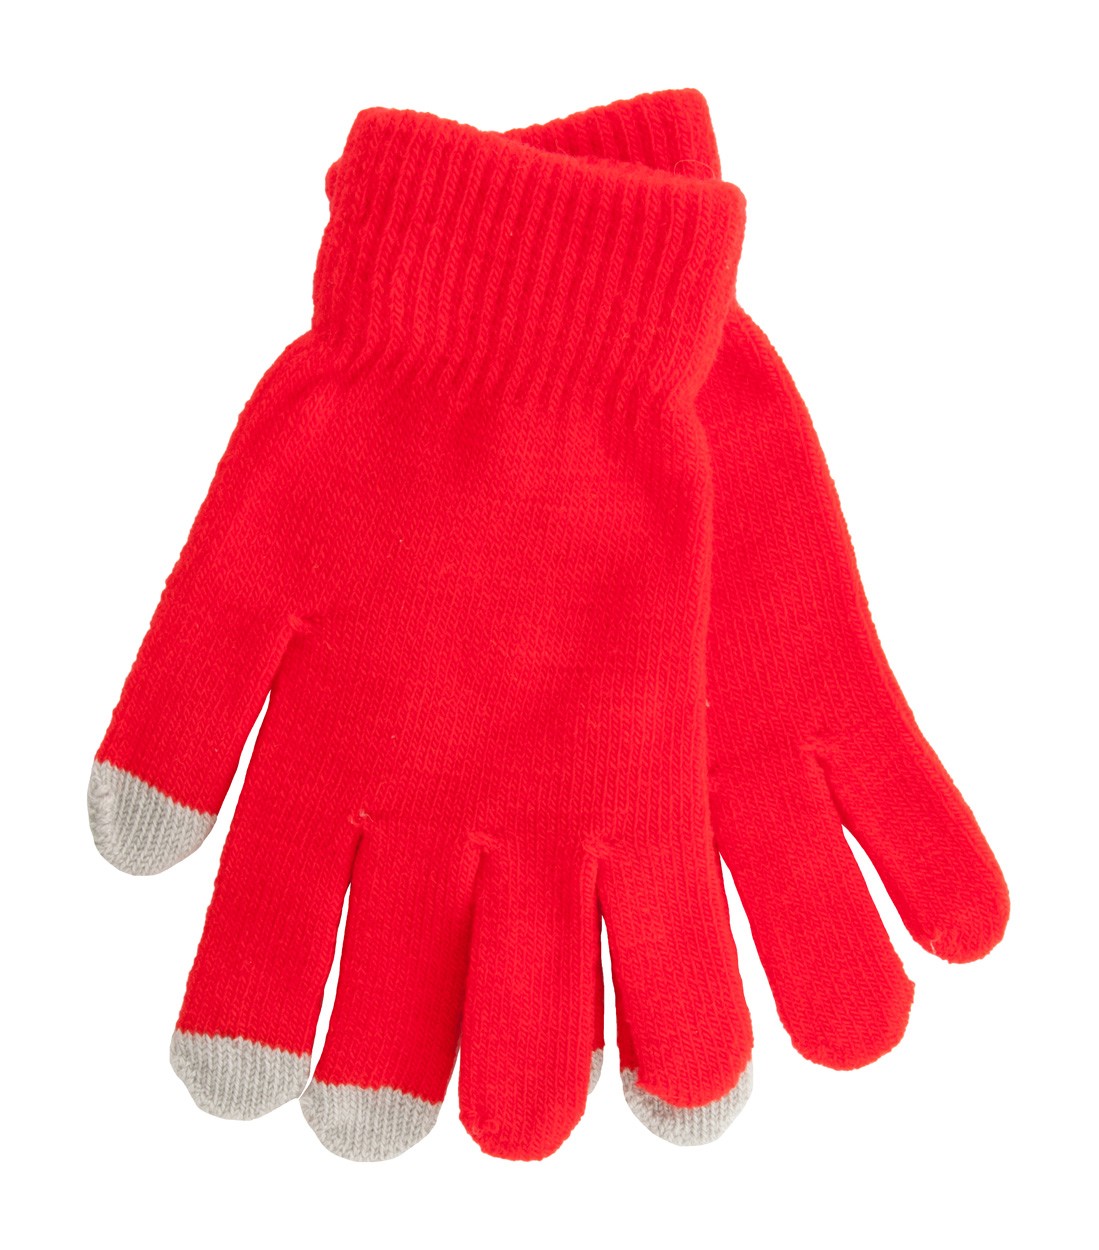 Touch Screen Gloves Actium - Red / Grey